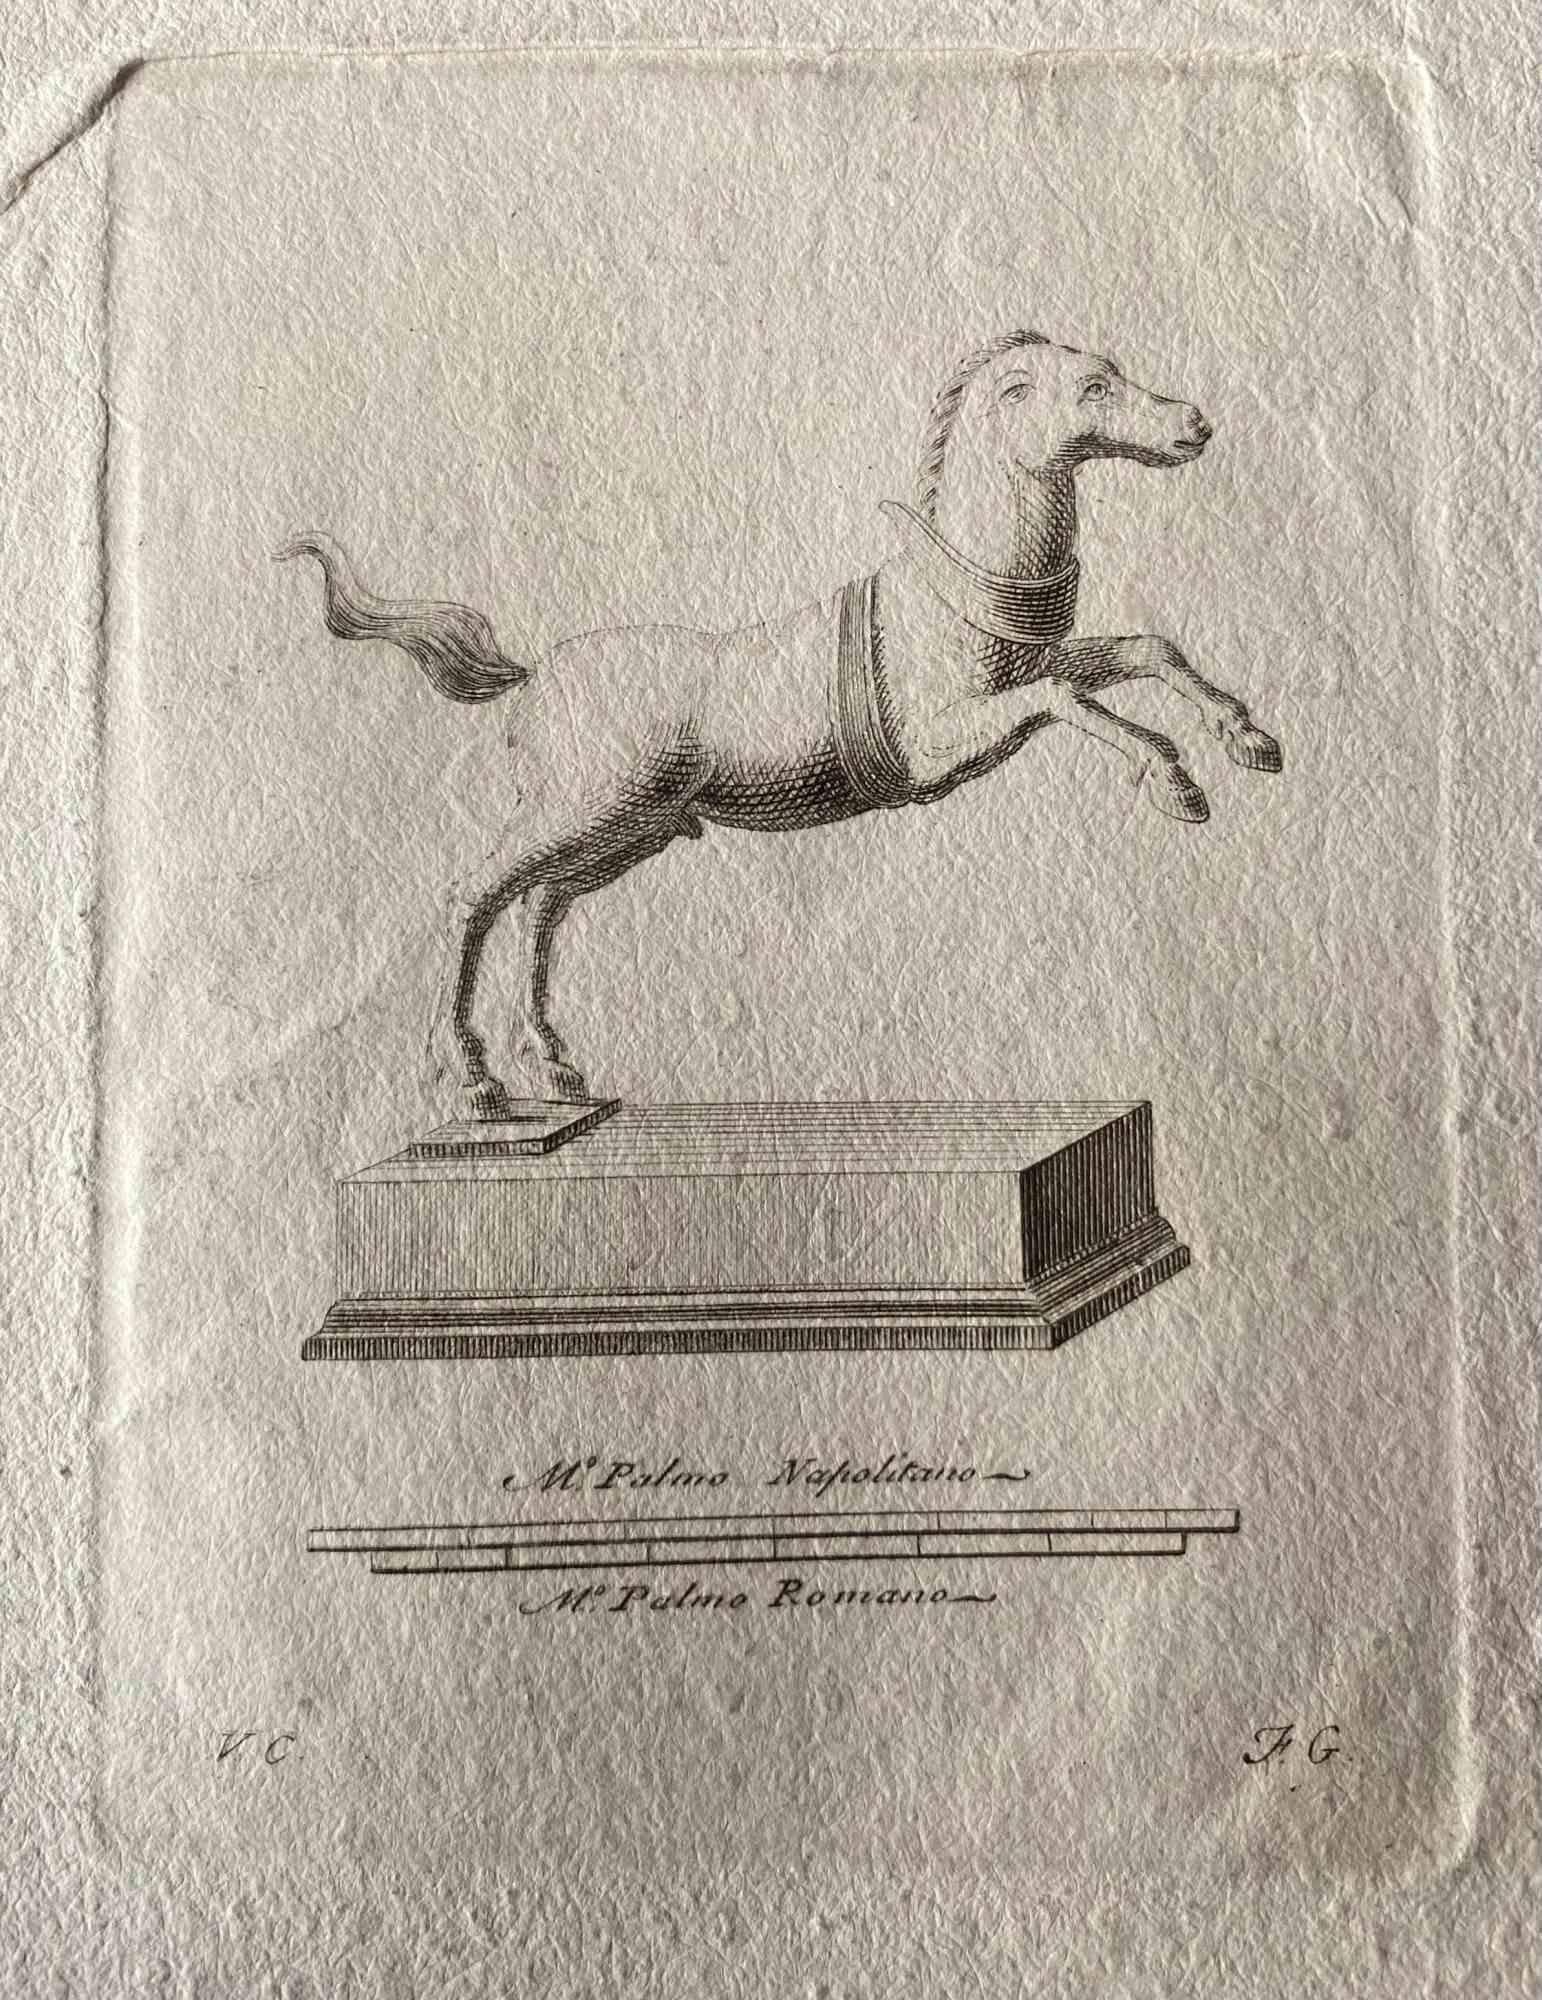 Animal Figures from Ancient Rome, from the Series "The Antiquities of Herculaneum Exposed", is an original etching from the end of the 18th century, made by Various Old Masters.

In very good condition, except for some stains along the margins.

In